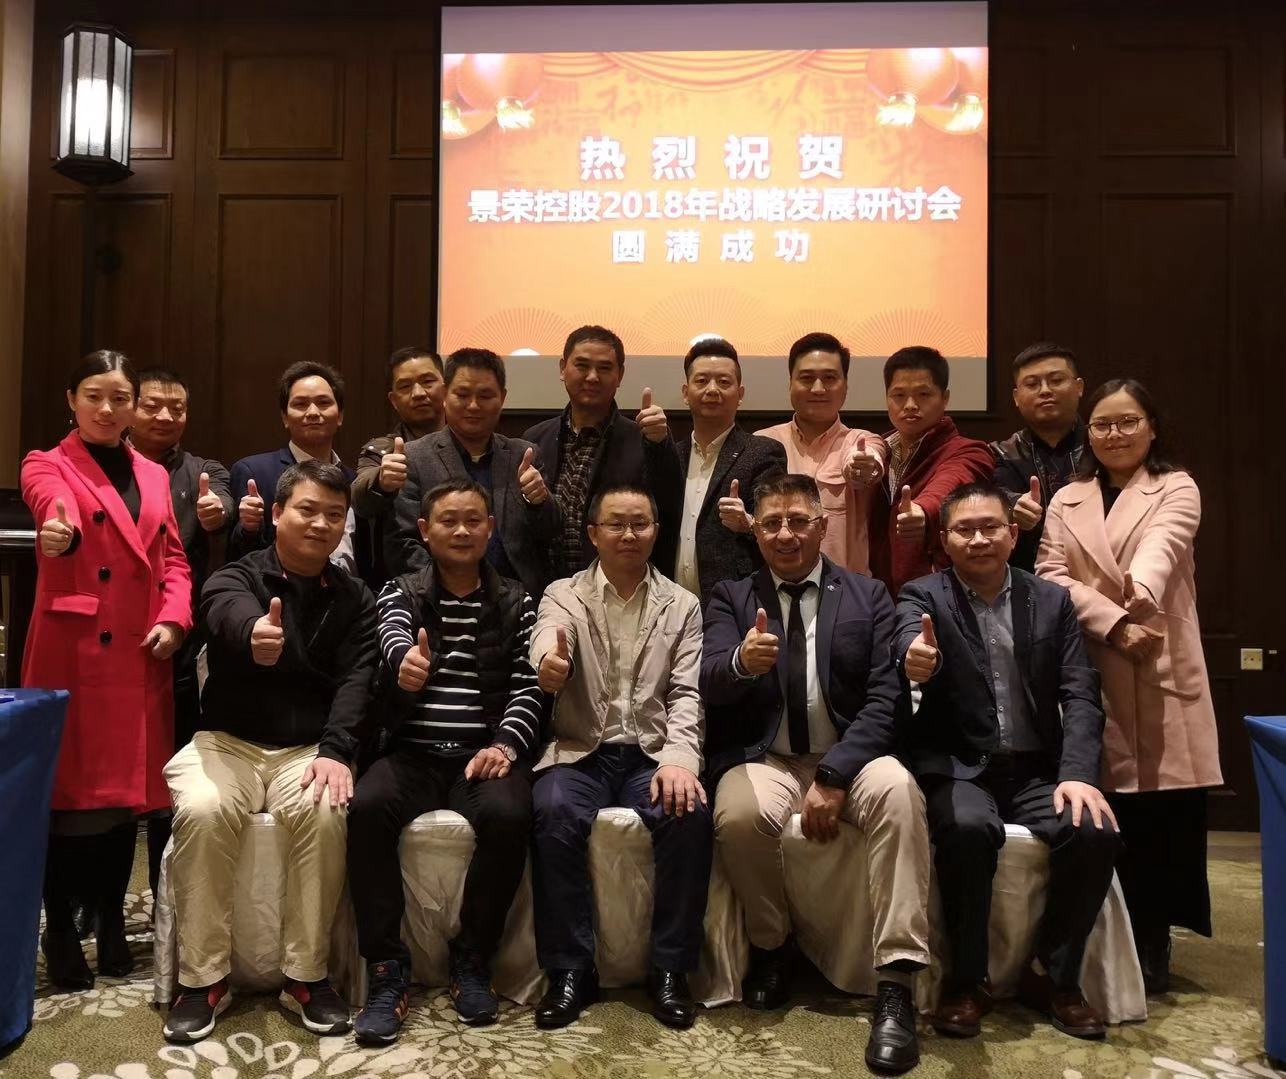 Tec Mold 2018 strategic meeting was held in Mt. Sanqingshan , Shangrao city - the birthplace of Taoi